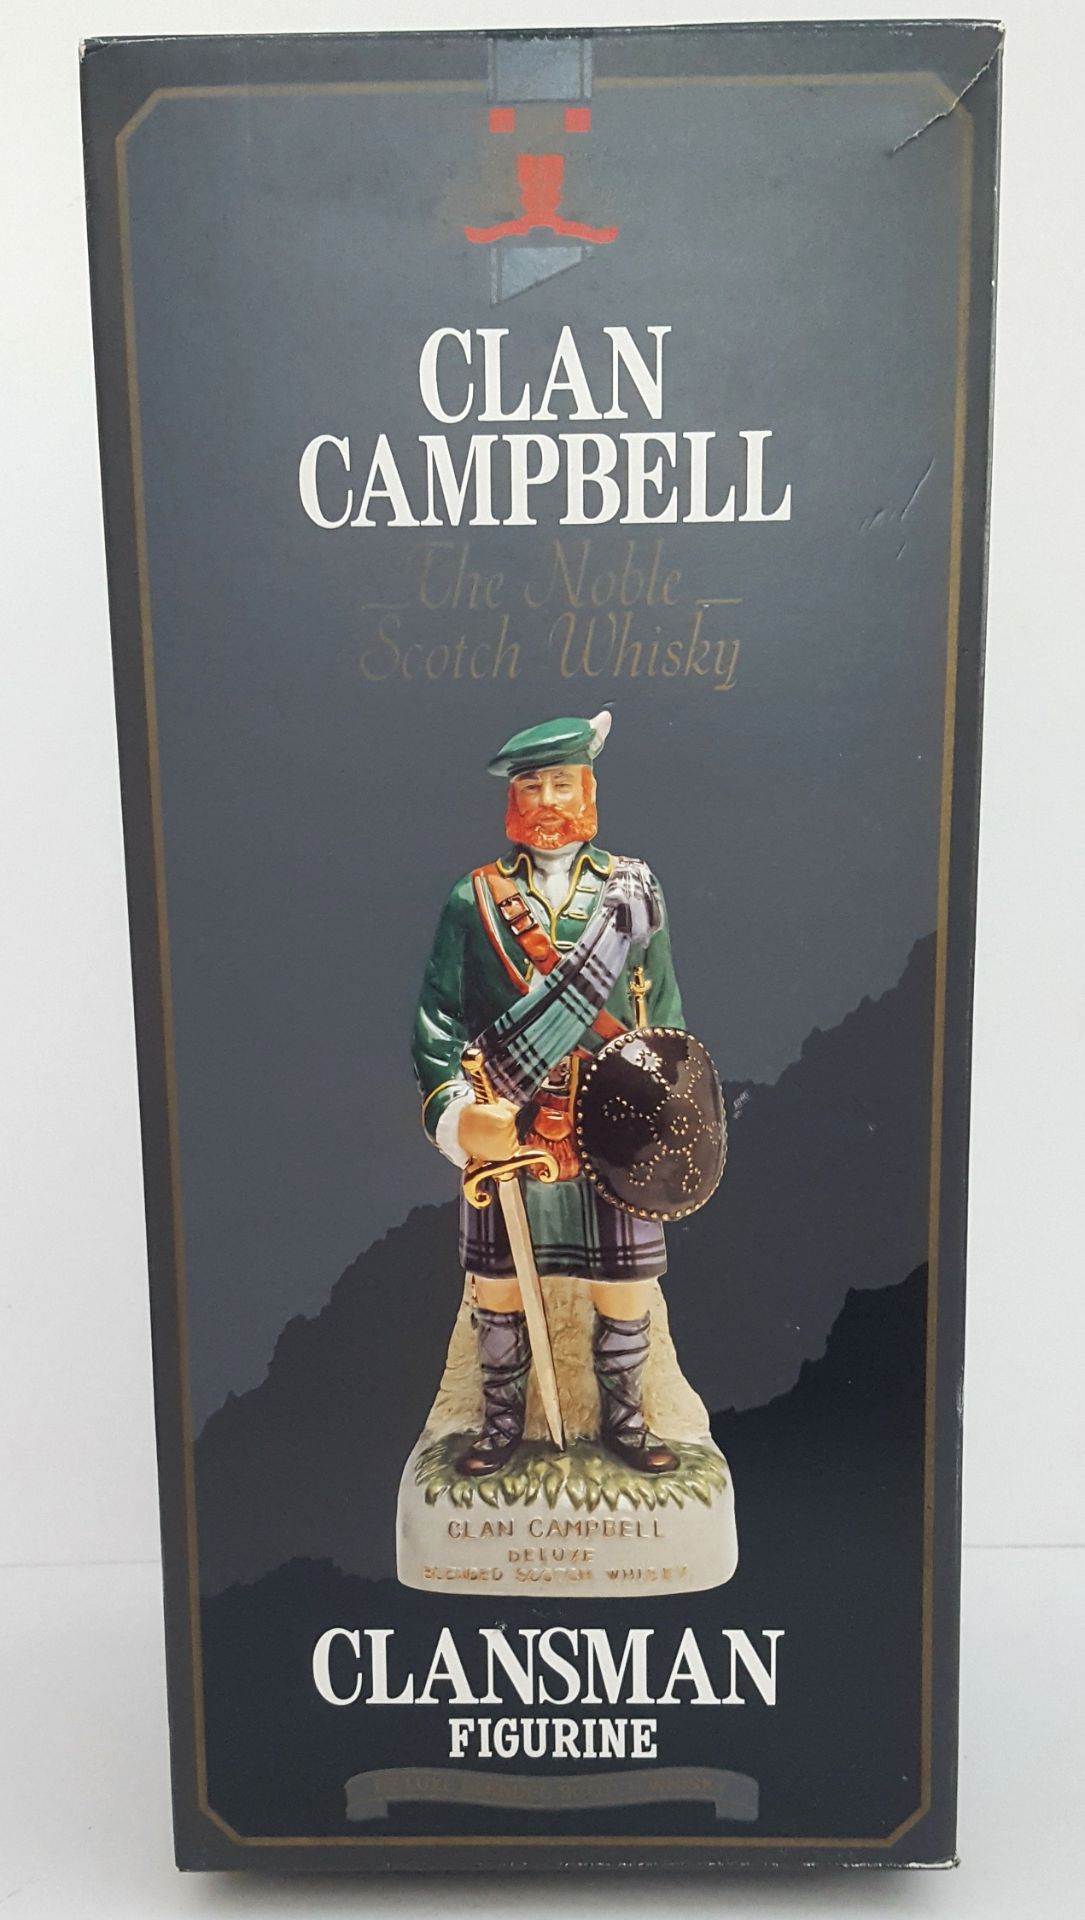 Collectable Whisky Clansman Figurine Clan Campbell Boxed Decanter - Image 2 of 3